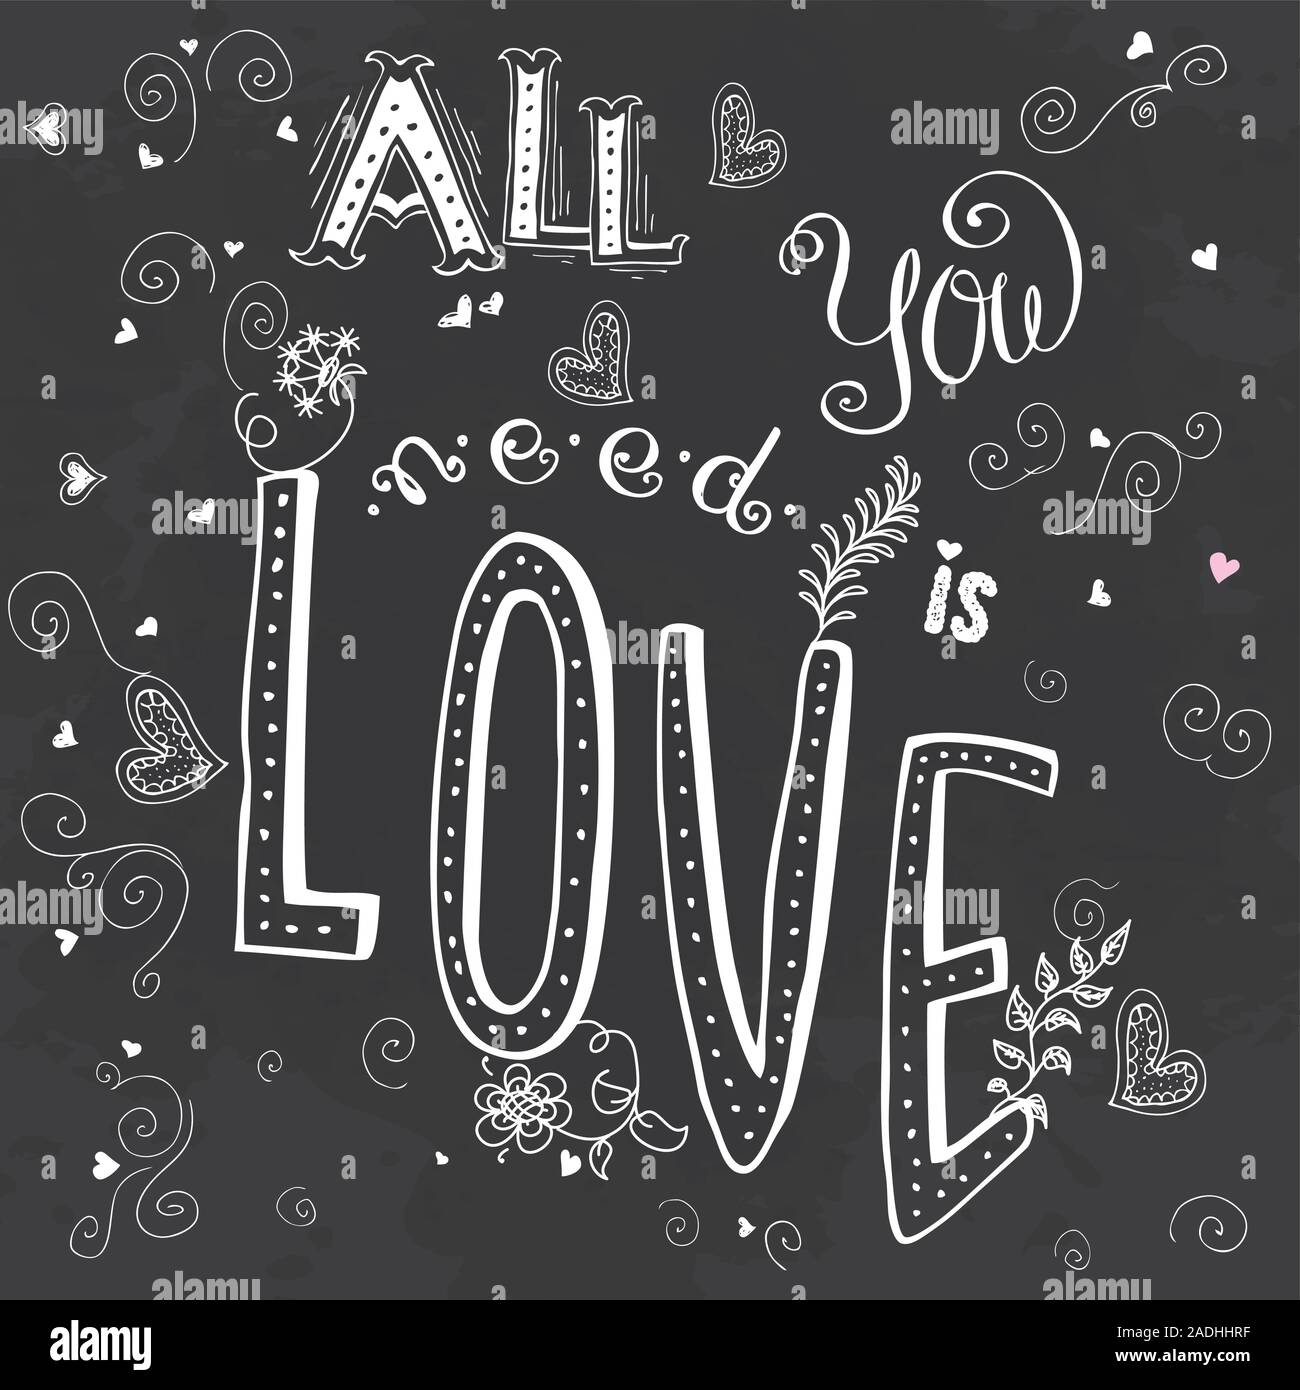 https://c8.alamy.com/comp/2ADHHRF/all-you-need-is-love-cute-hand-drawn-lettering-on-dark-background-stock-vector-illustration-2ADHHRF.jpg